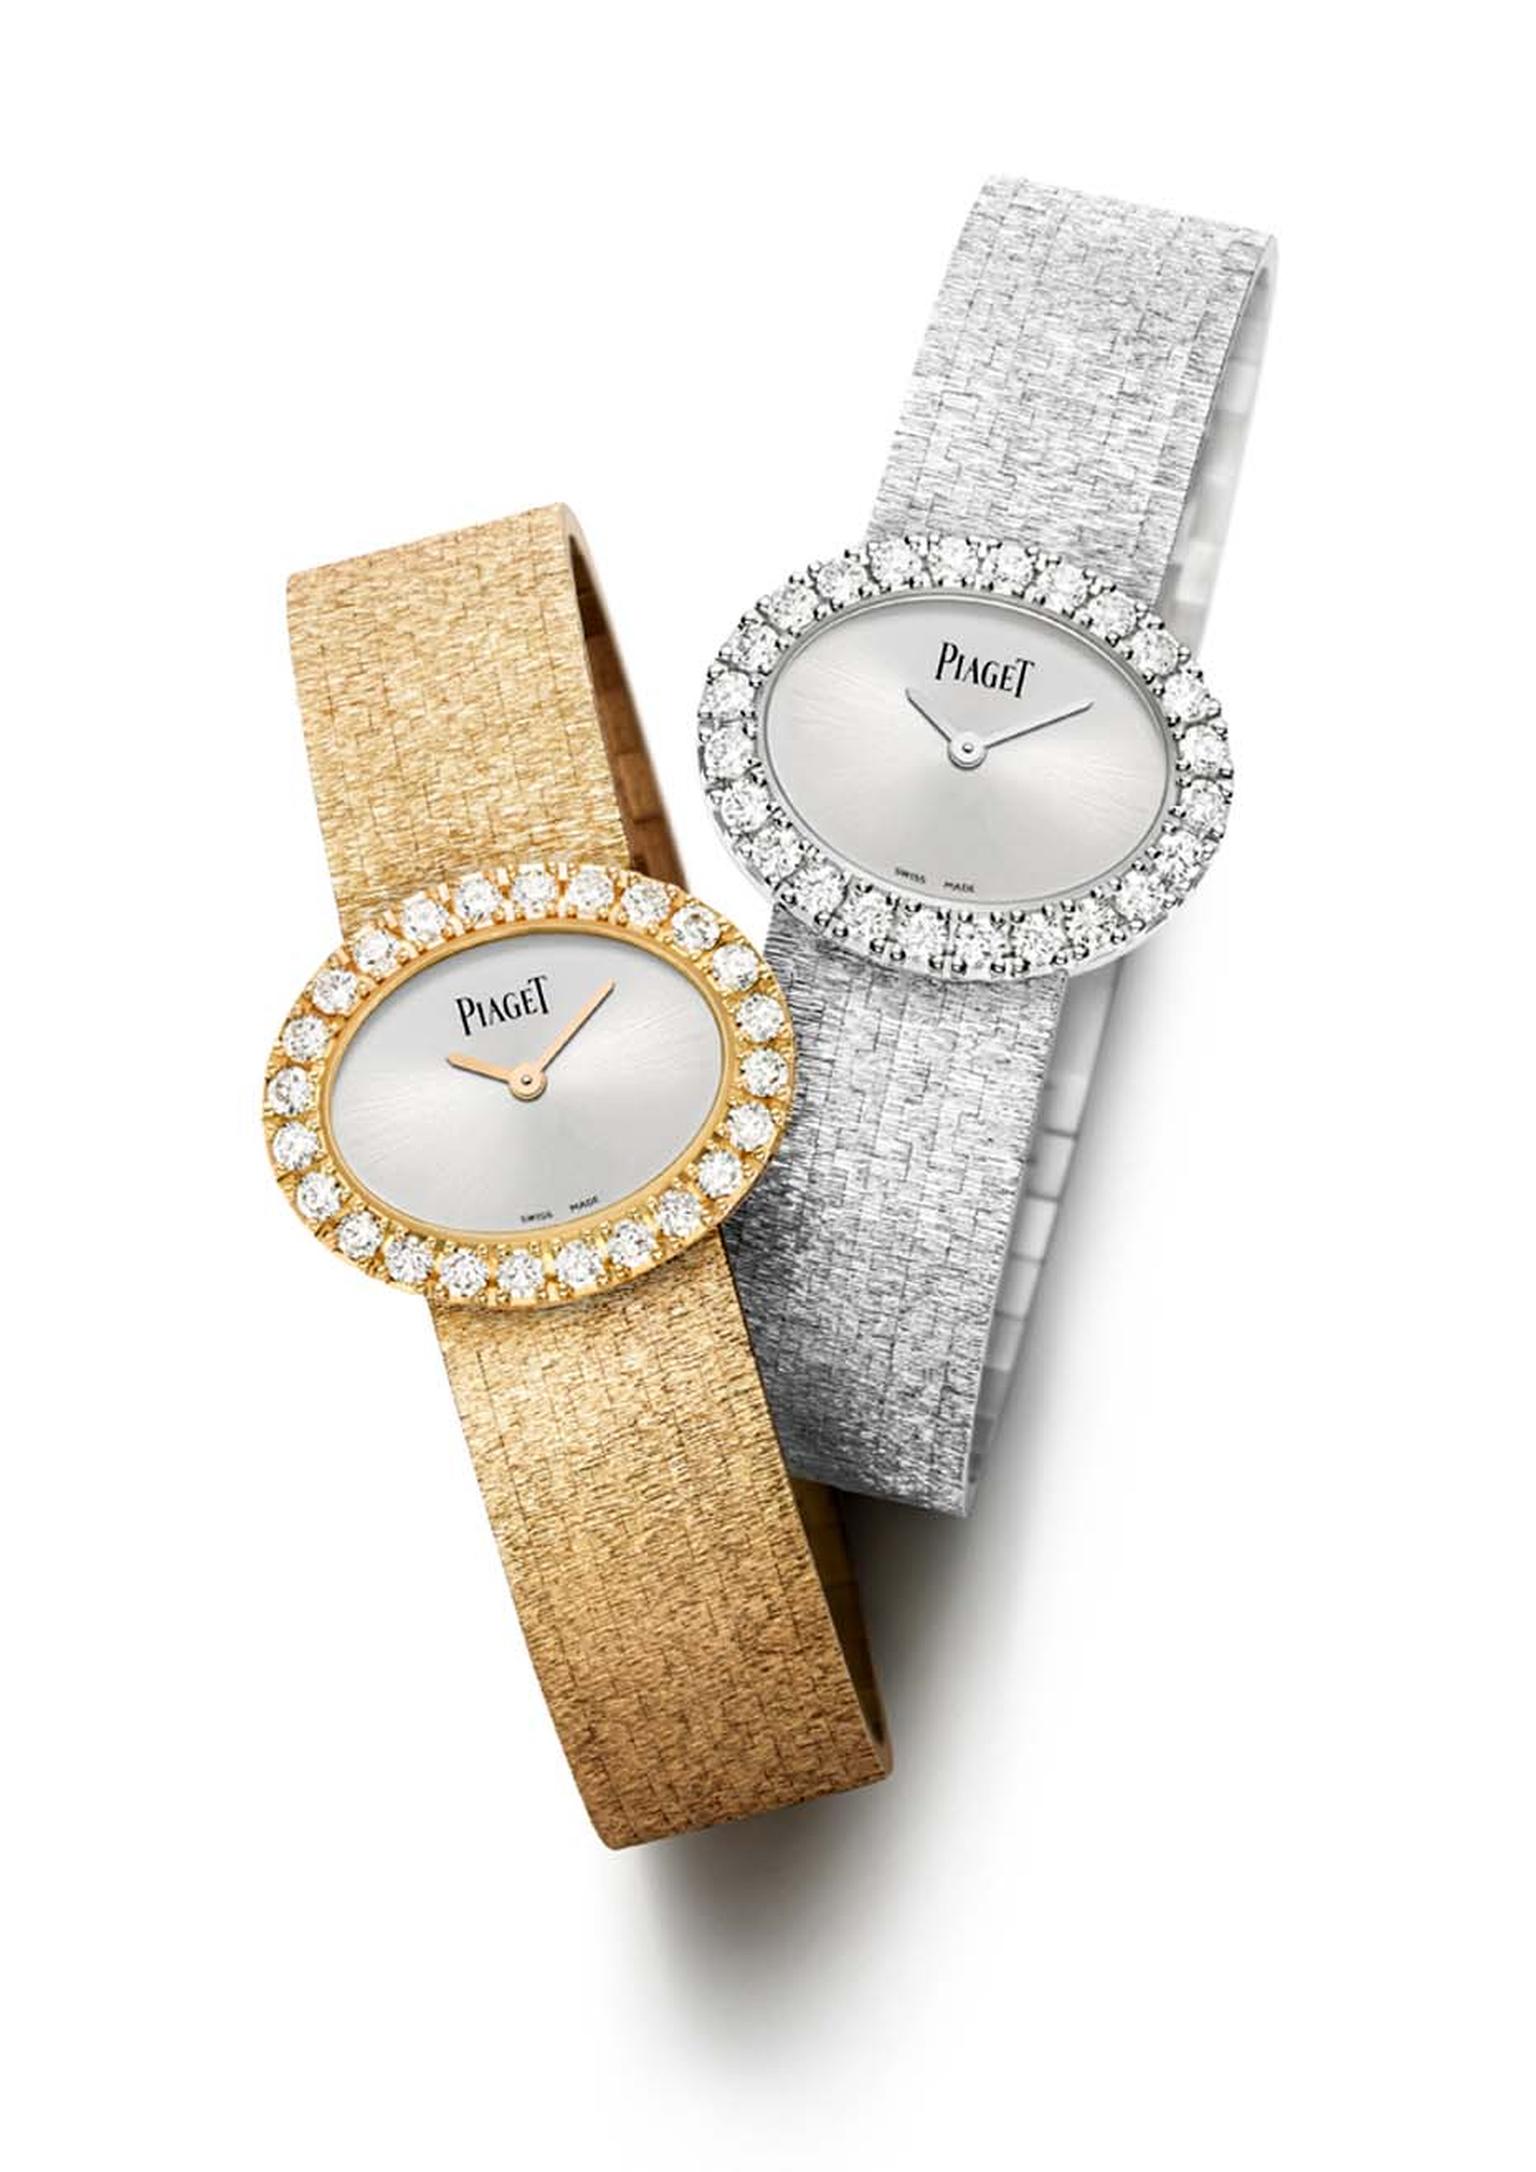 Piaget's traditional Gold Oval watches quickly became favourites of women like Jackie Onassis, Sophia Loren, Gina Lollobrigida and Mireille Mathieu.